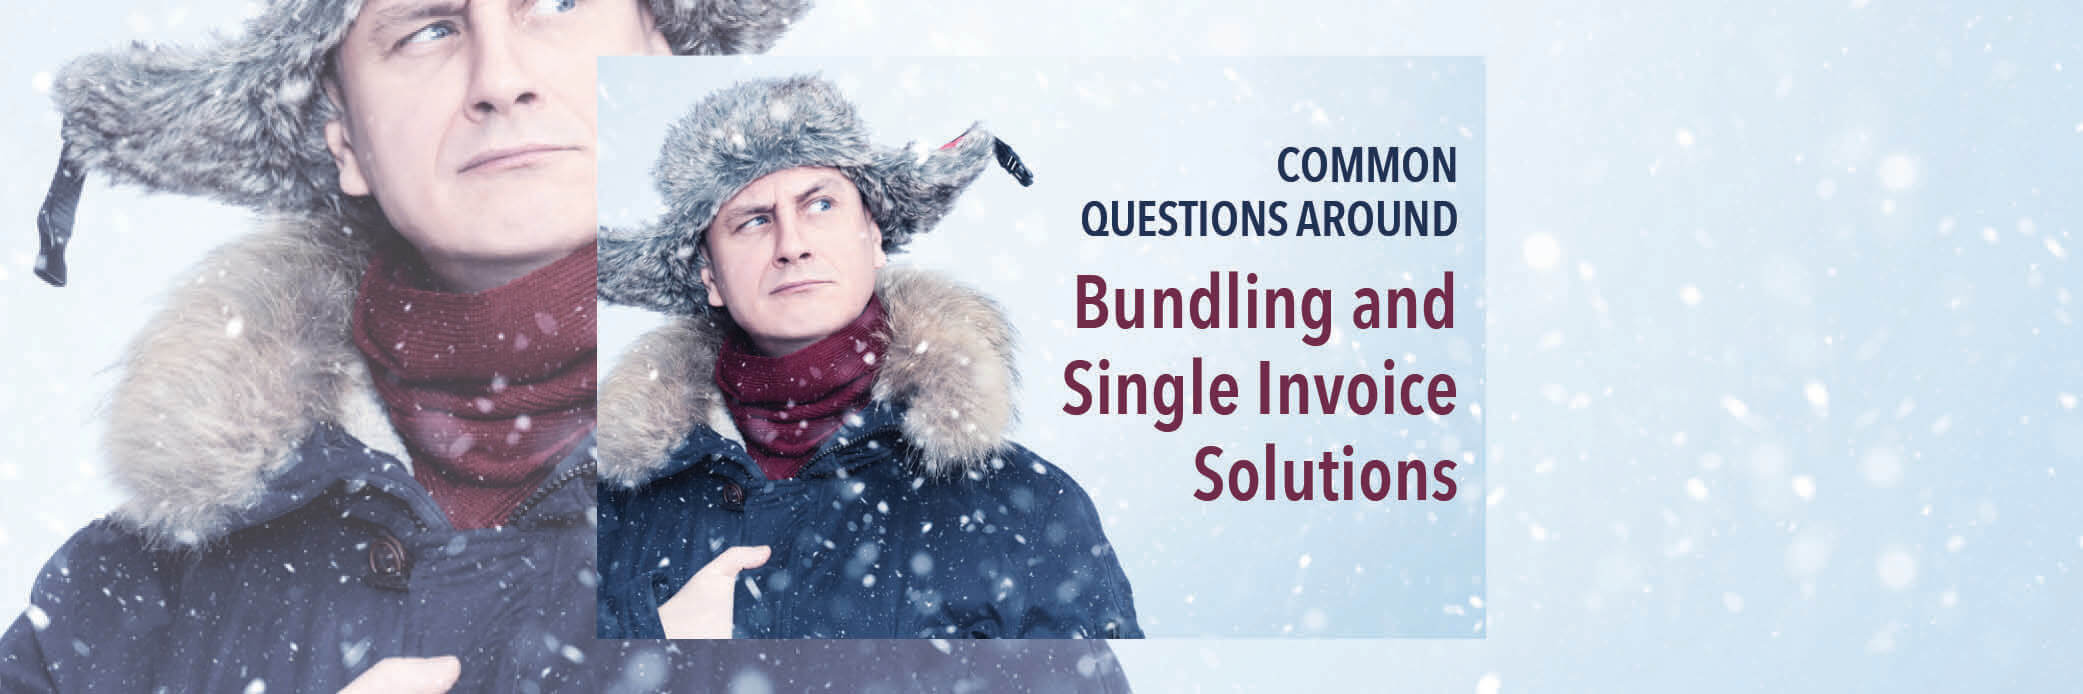 Common Questions Around Bundling and Single Invoice Solutions